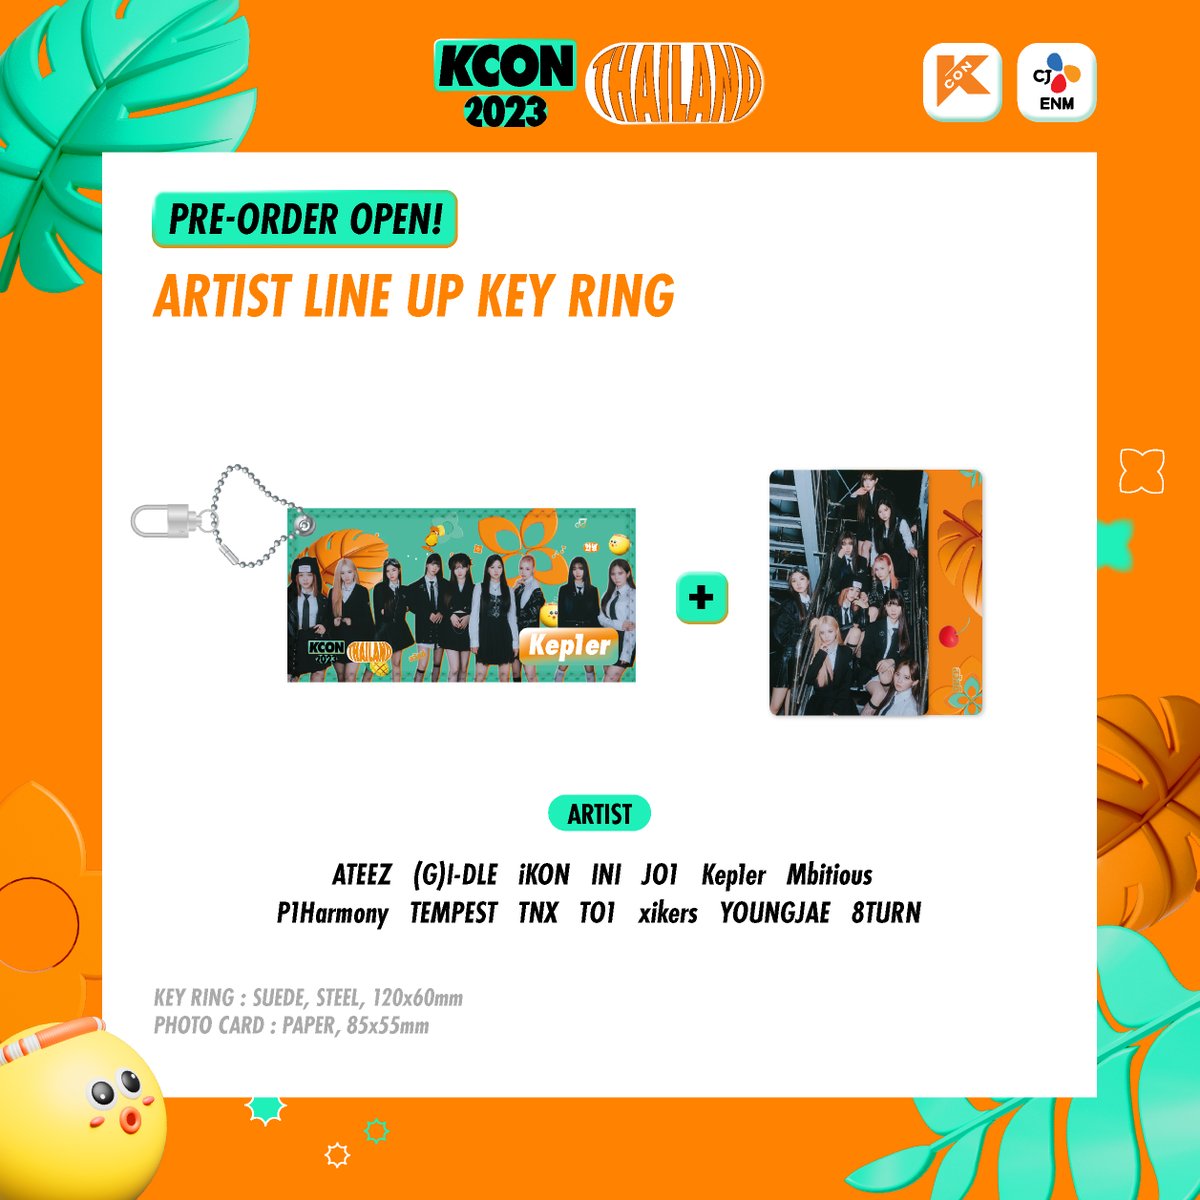 KCON_official tweet picture